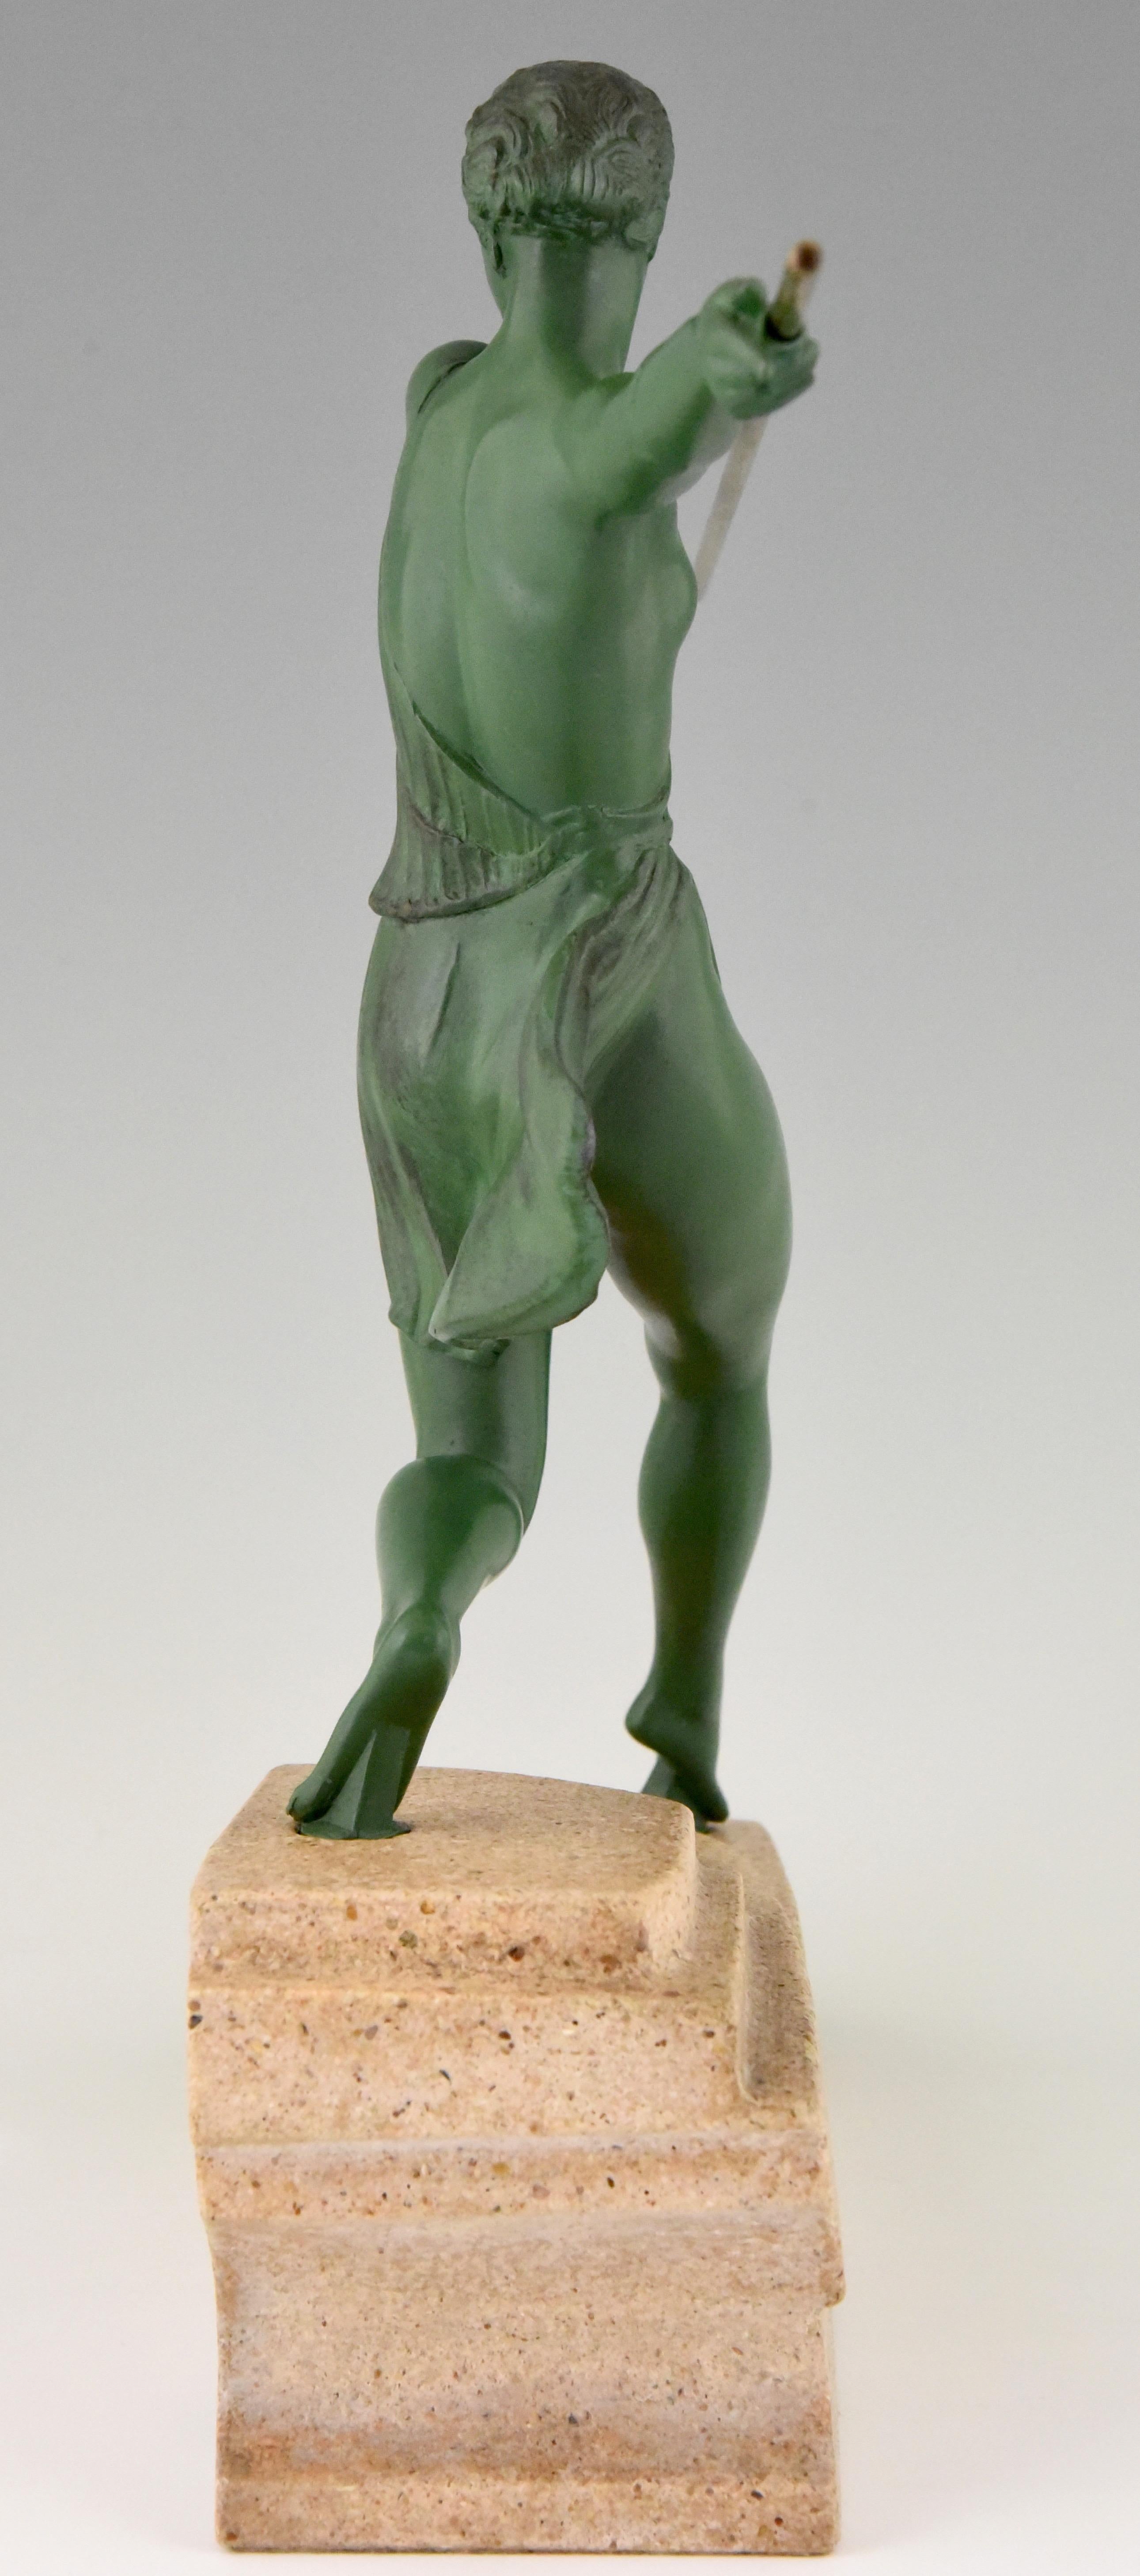 Art Deco Sculpture Female Javelin Thrower Fayral, Pierre Le Faguays 2